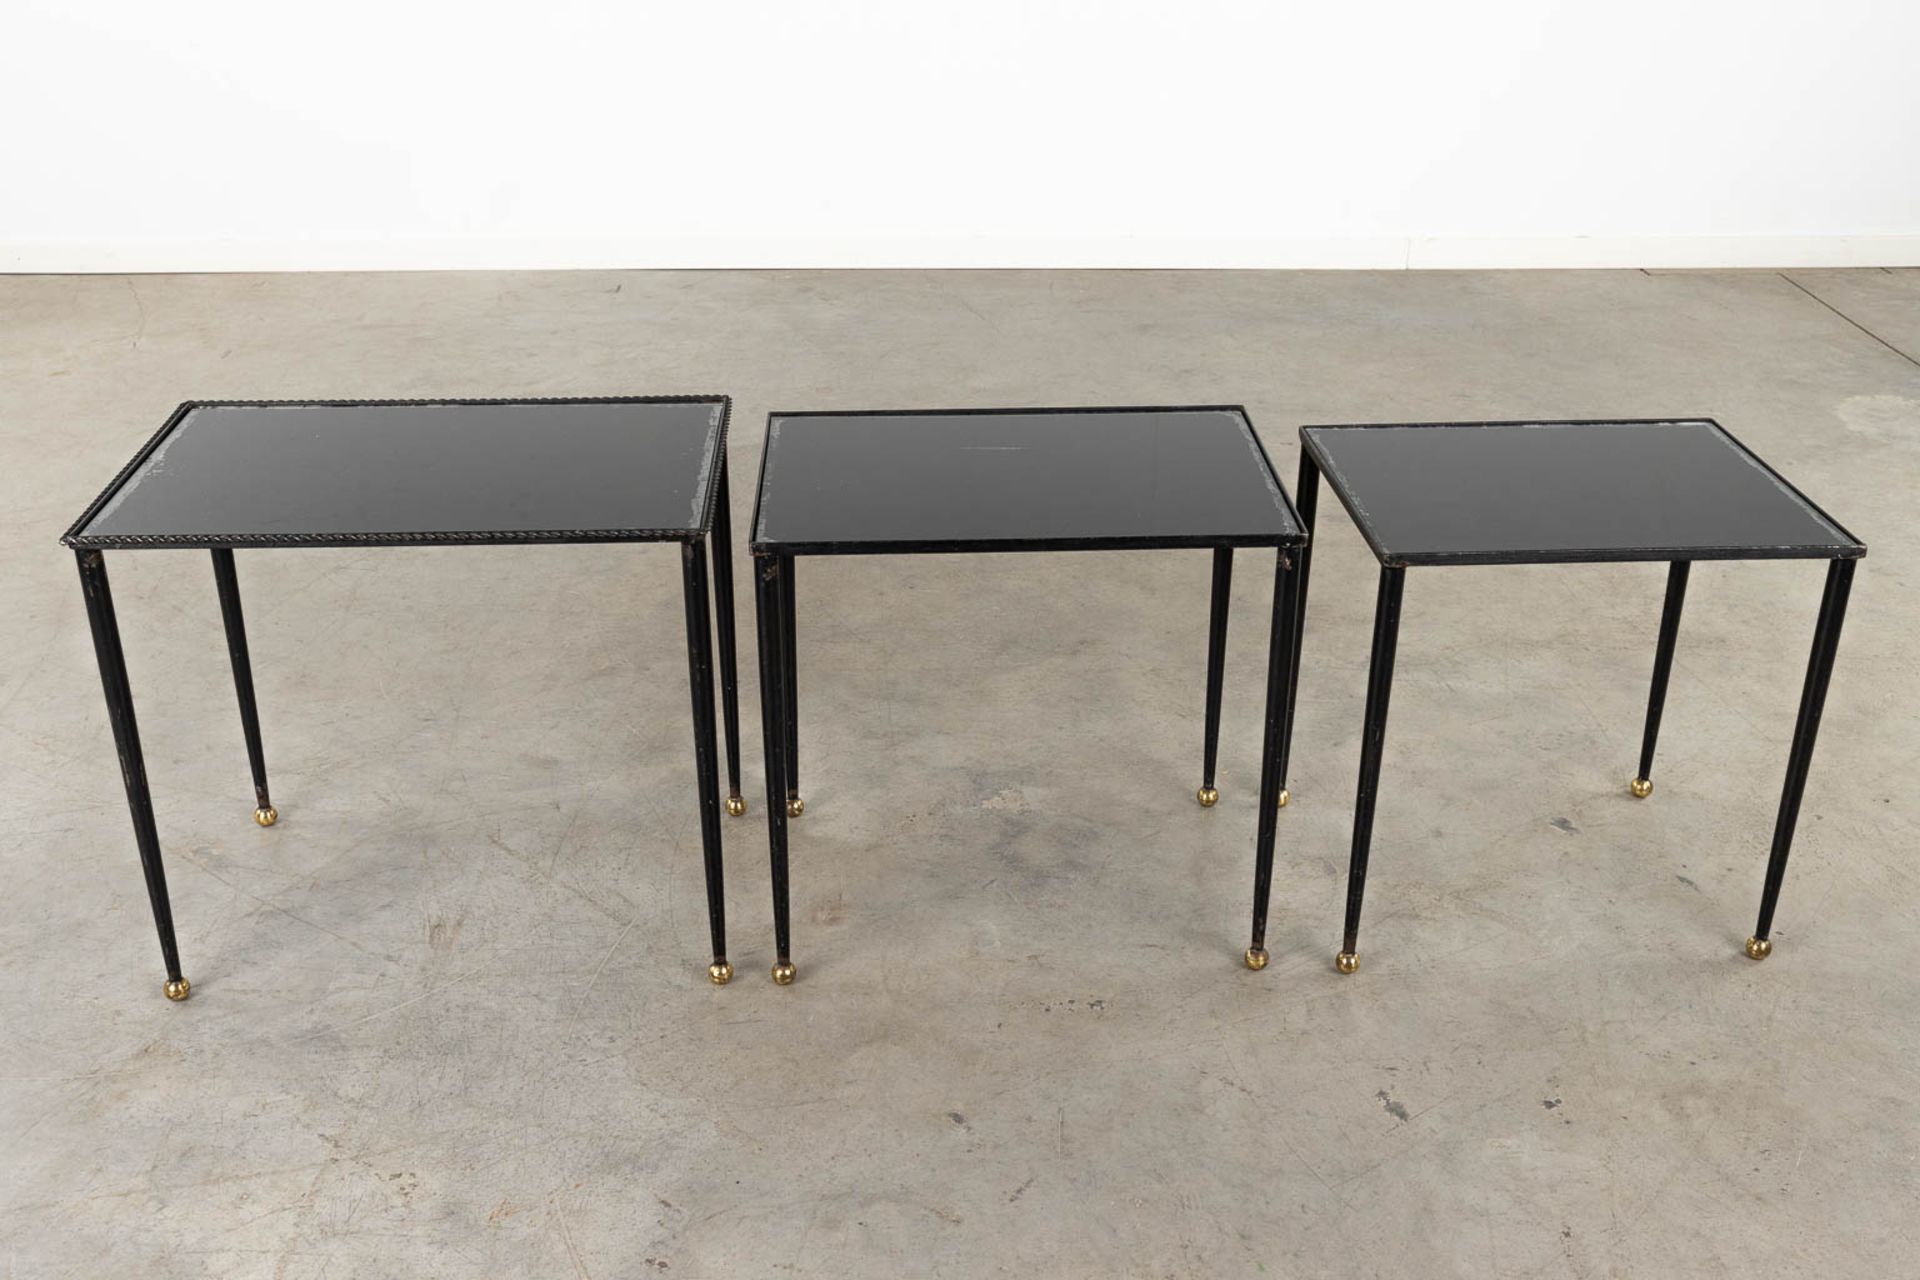 A set of Nesting tables, metal and black tinted glass. 20th C. (D:56 x W:37 x H:50 cm) - Image 6 of 10